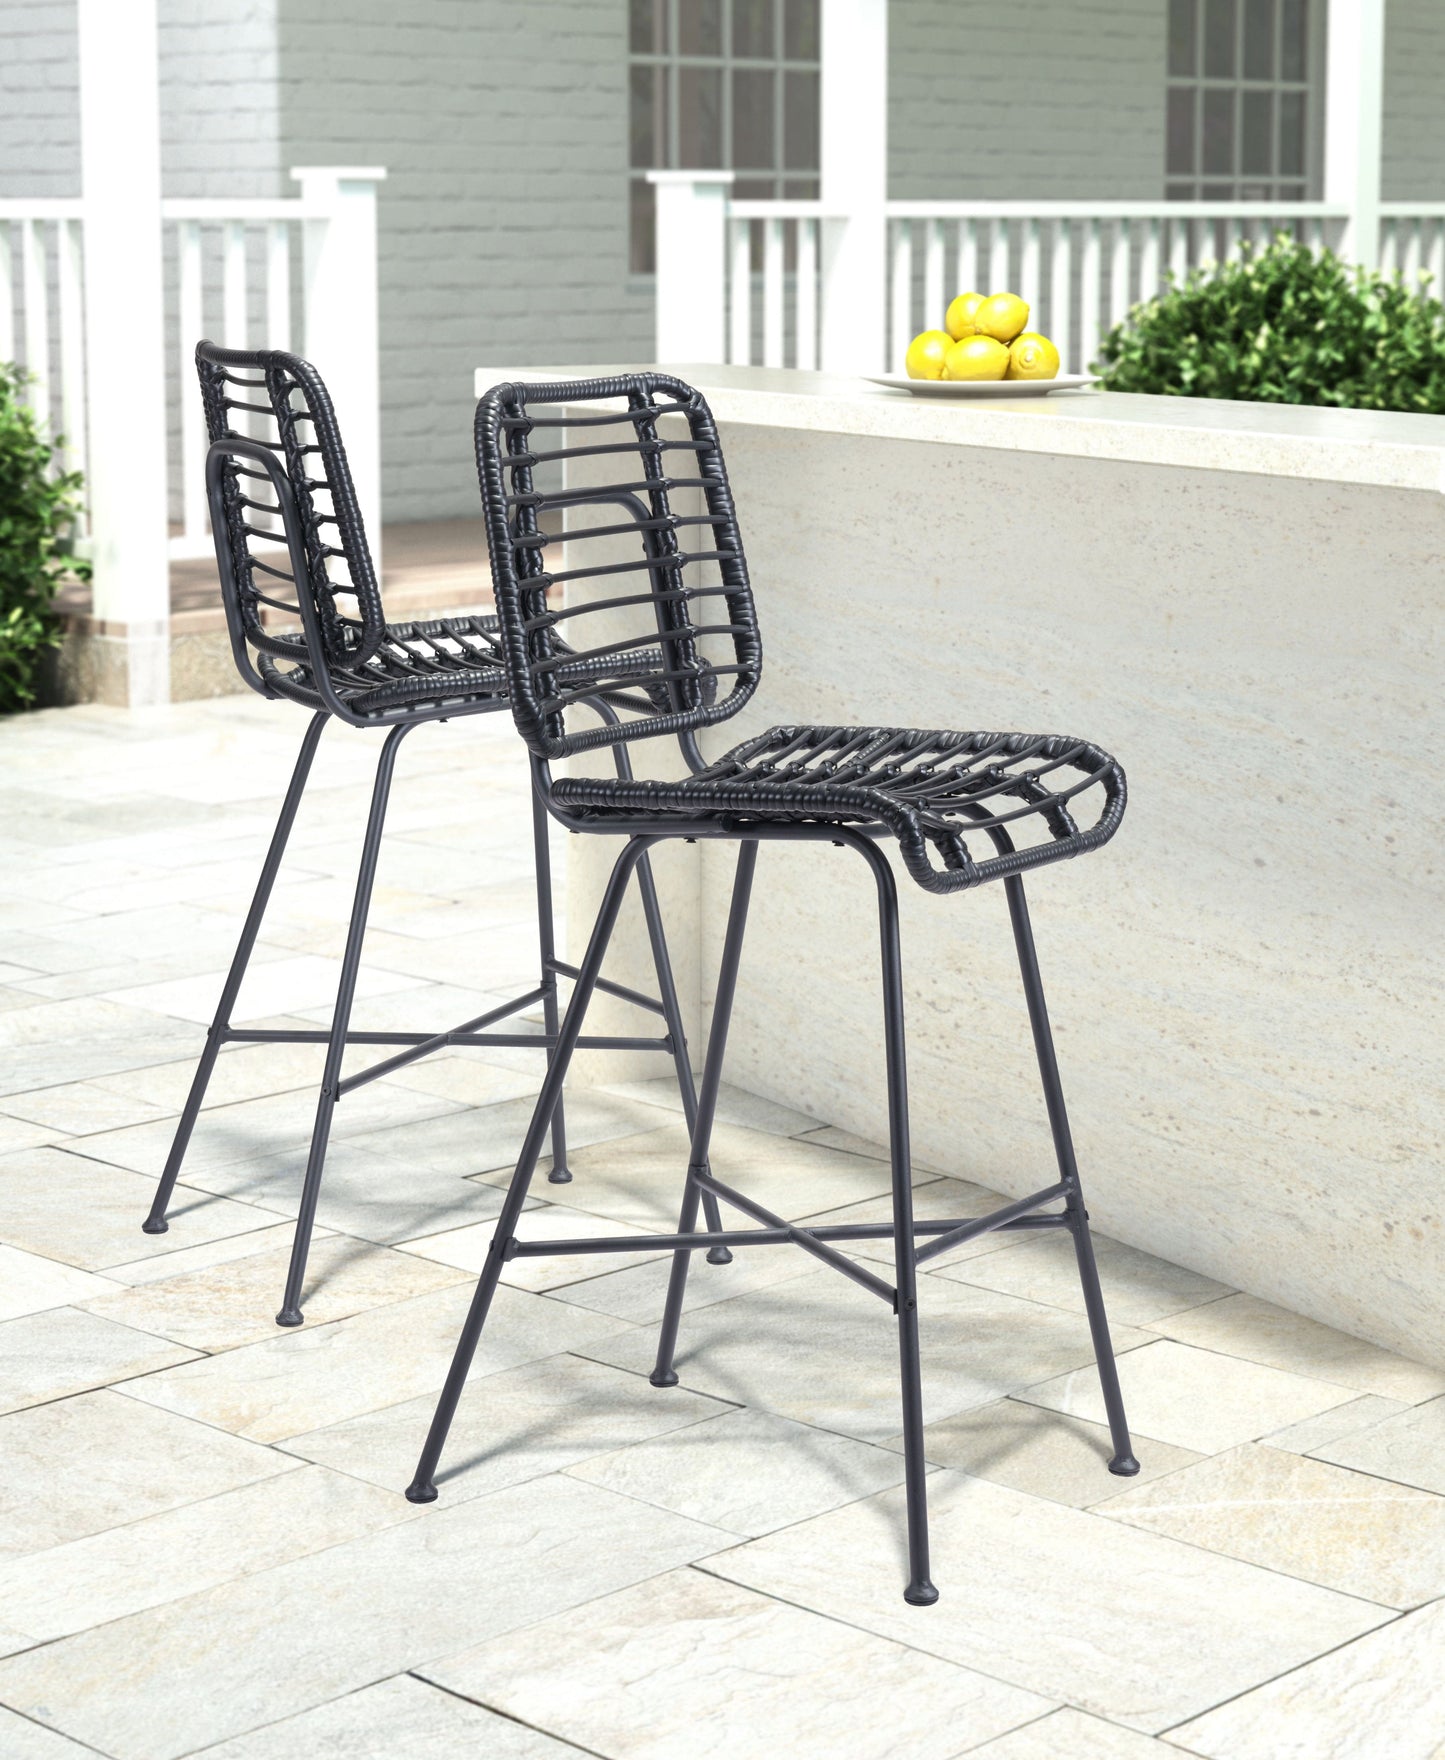 ZuoMod Outdoor Barstools - each sold separately